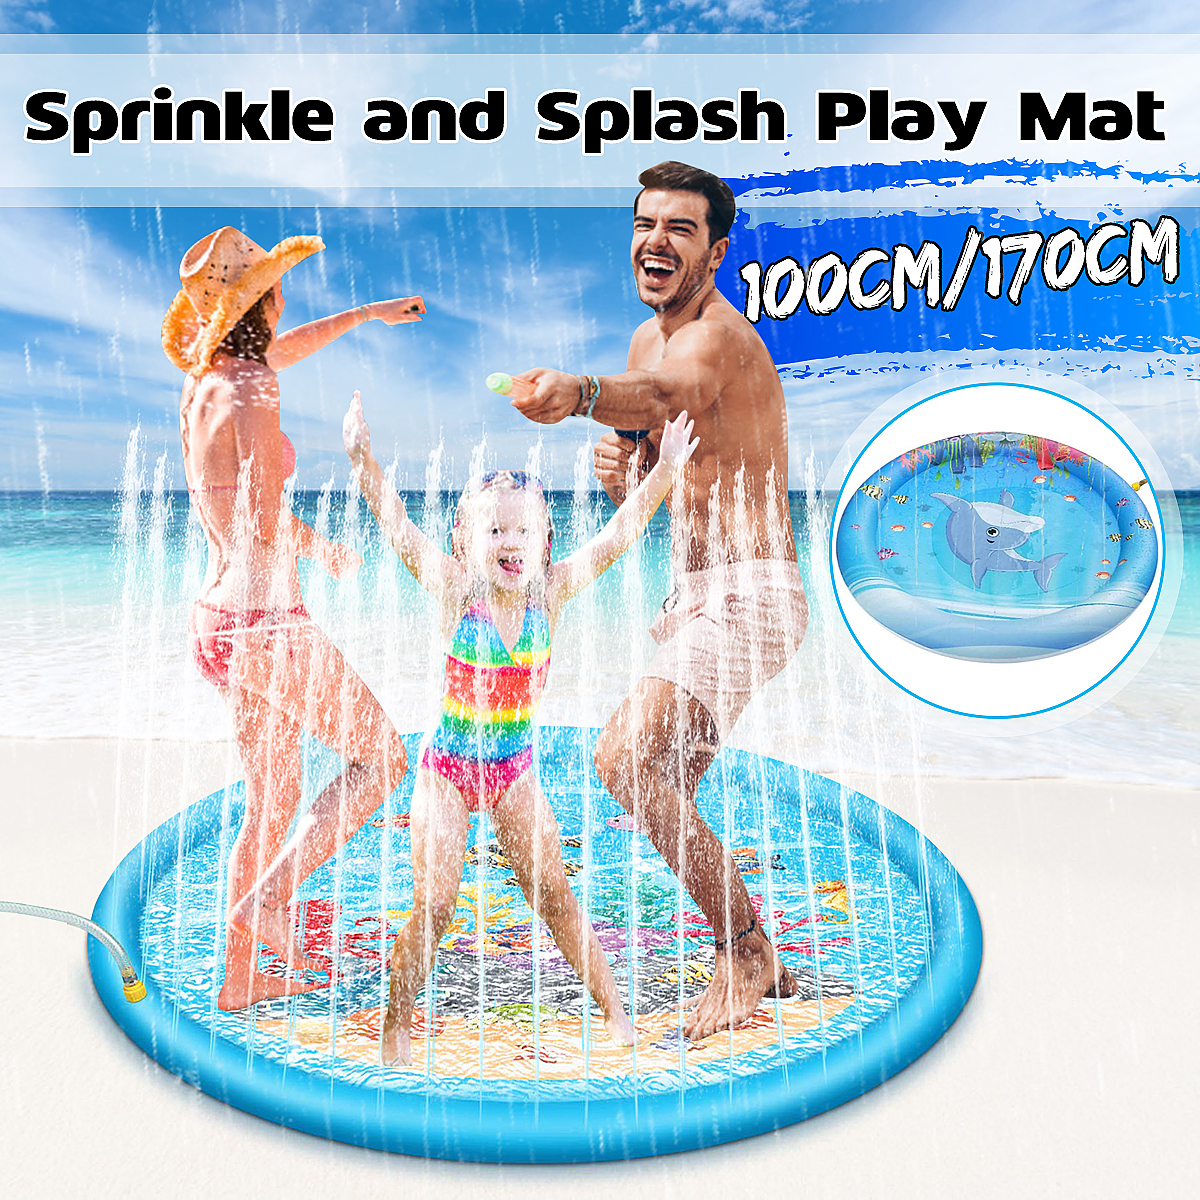 67inch Splash Water Play Mat Sprinkle Splash Play Mat Toy for Outdoor Swimming Beach Lawn Inflatable Sprinkler Pad for Kids